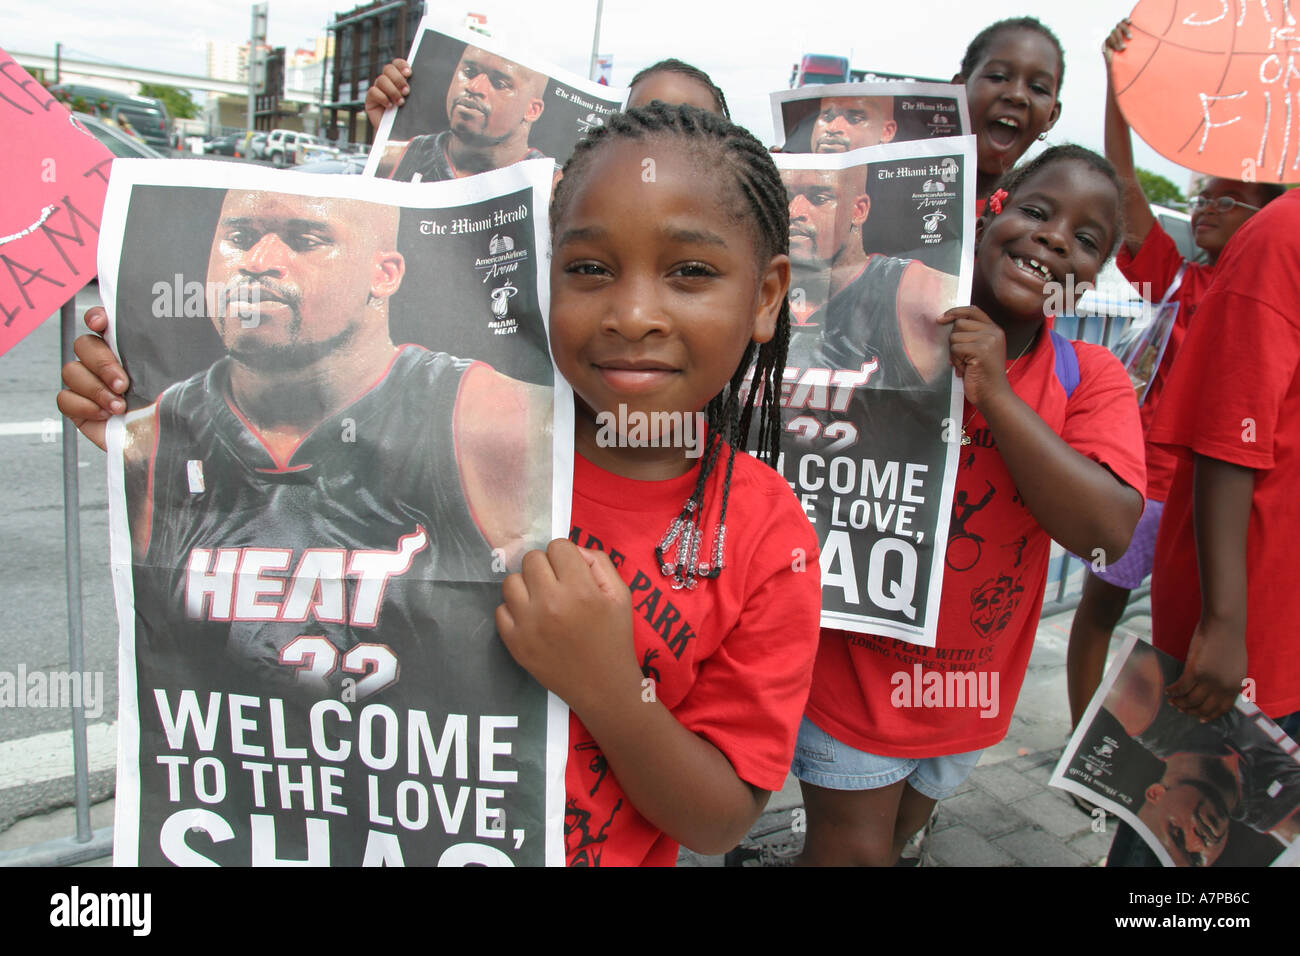 Miami Florida,American Airlines Arena,Miami Heat,NBA,National Basketball Association,Shaquille O'Neal debut,fans,Black girls,FL0723040014 Stock Photo